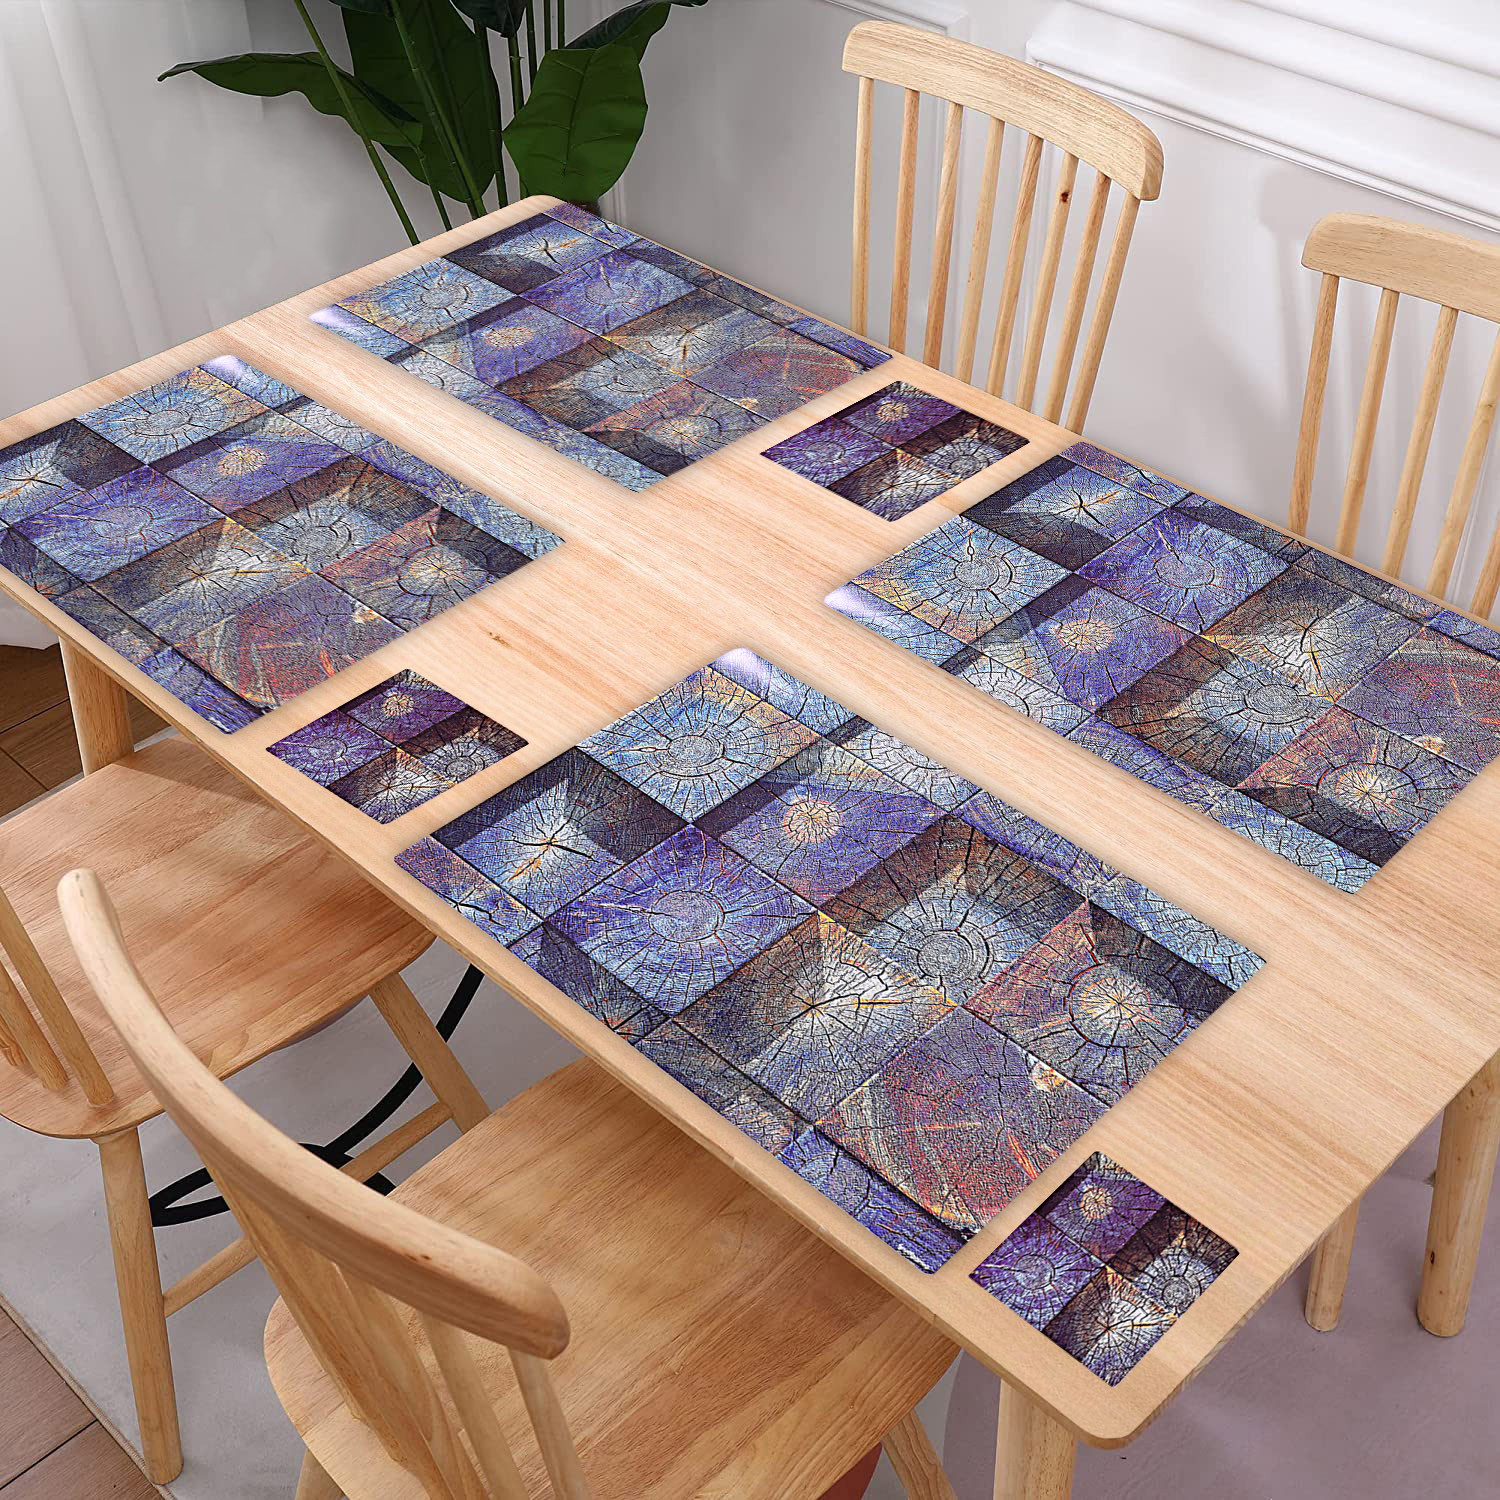 Kuber Industries Placemat | Table Placemats with Coasters | Table Placemats with Tea Coasters | Dining Table Placemats & Coasters Set | Tree Square | 12 Piece Set | Blue